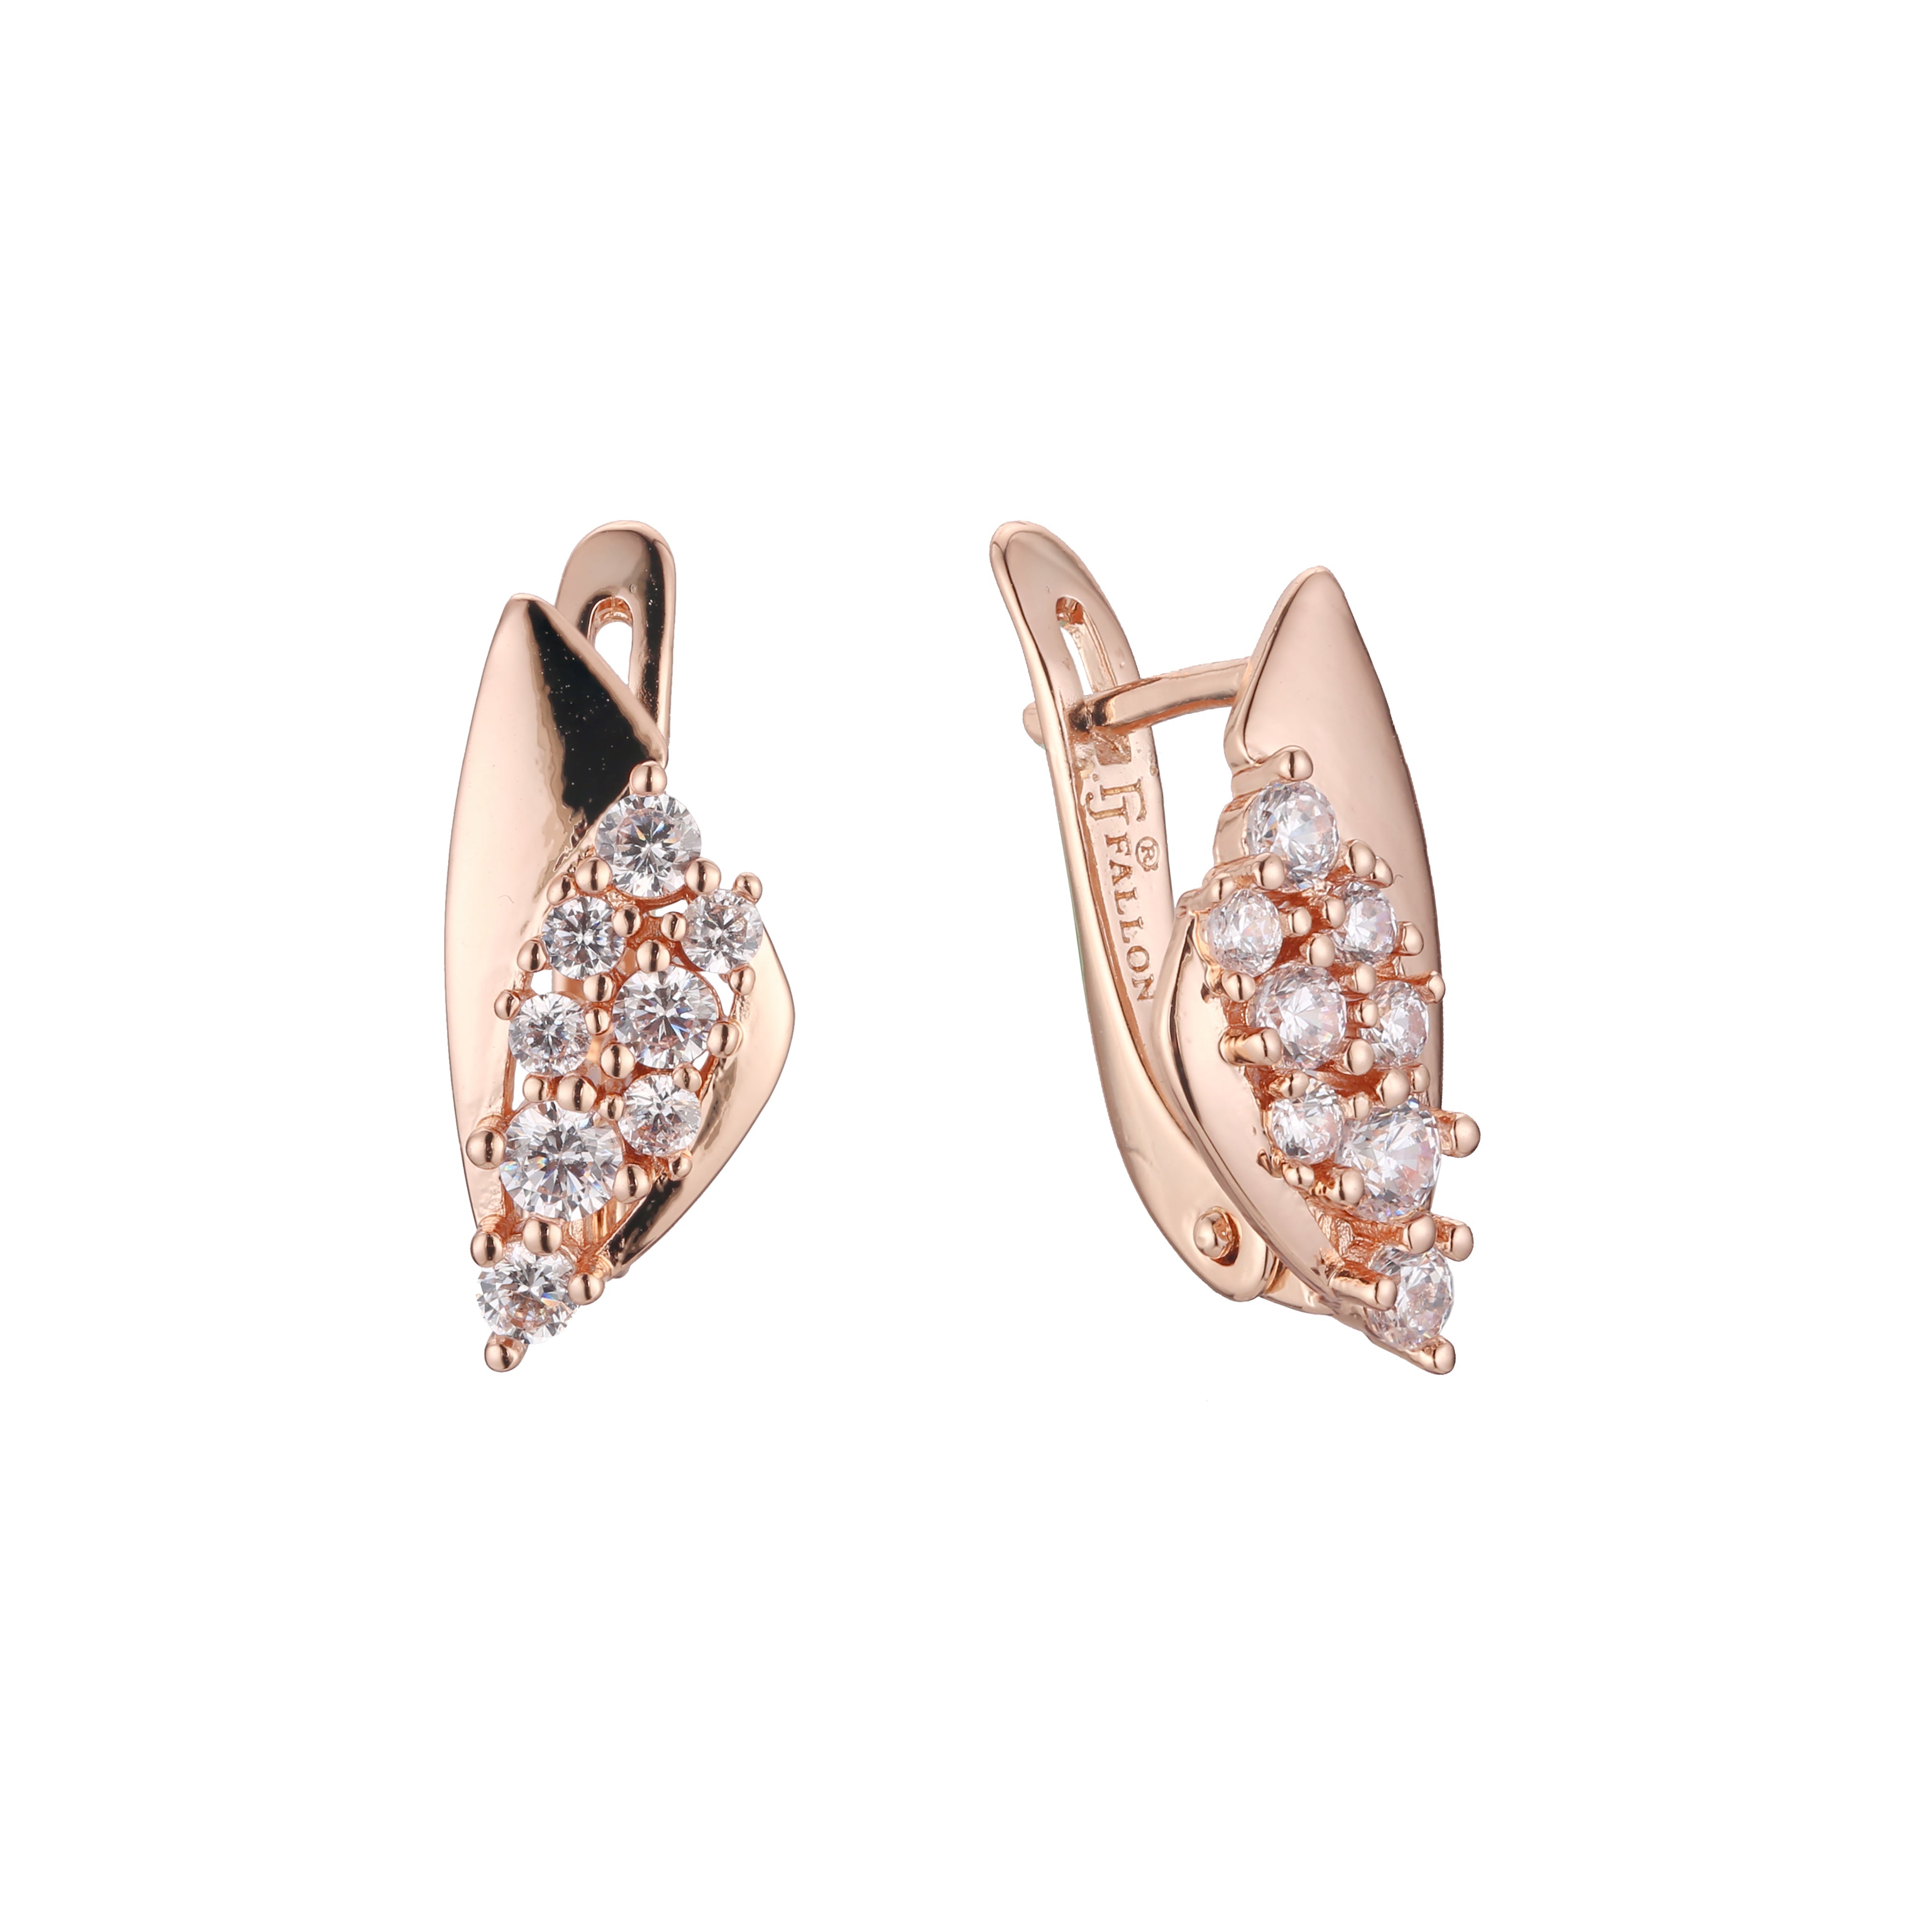 Earrings in 14K Gold, Rose Gold plating colors